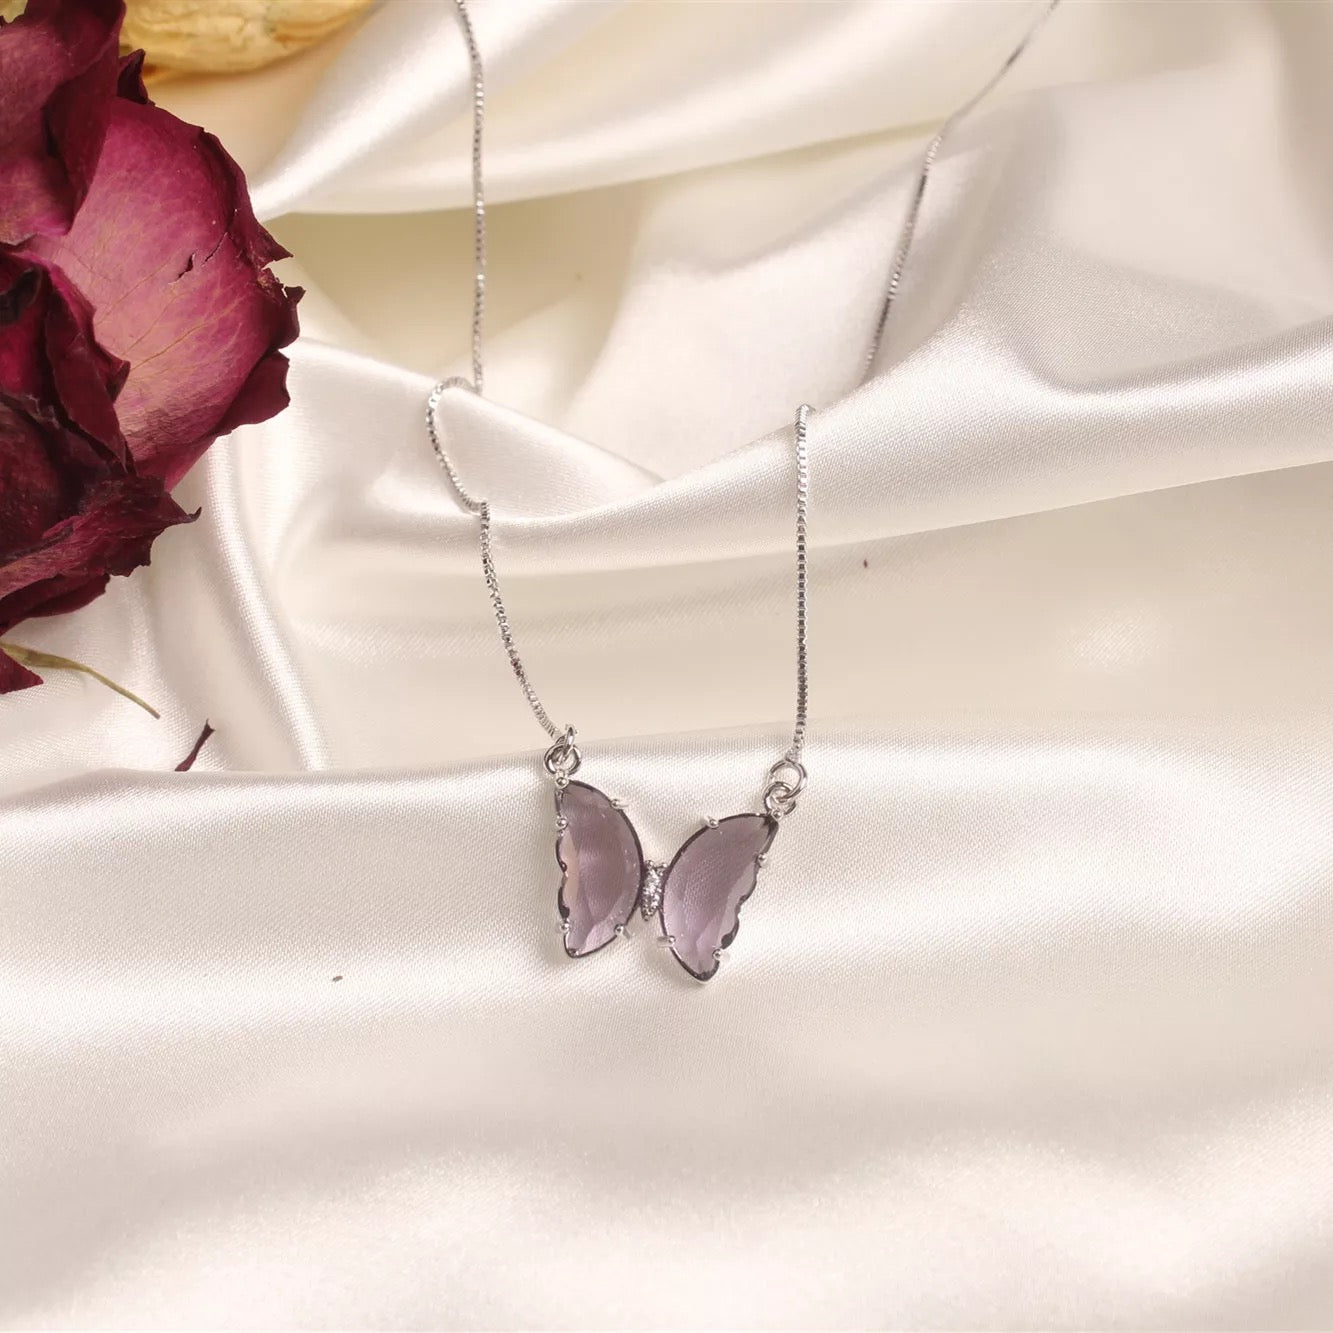 Collana Butterfly